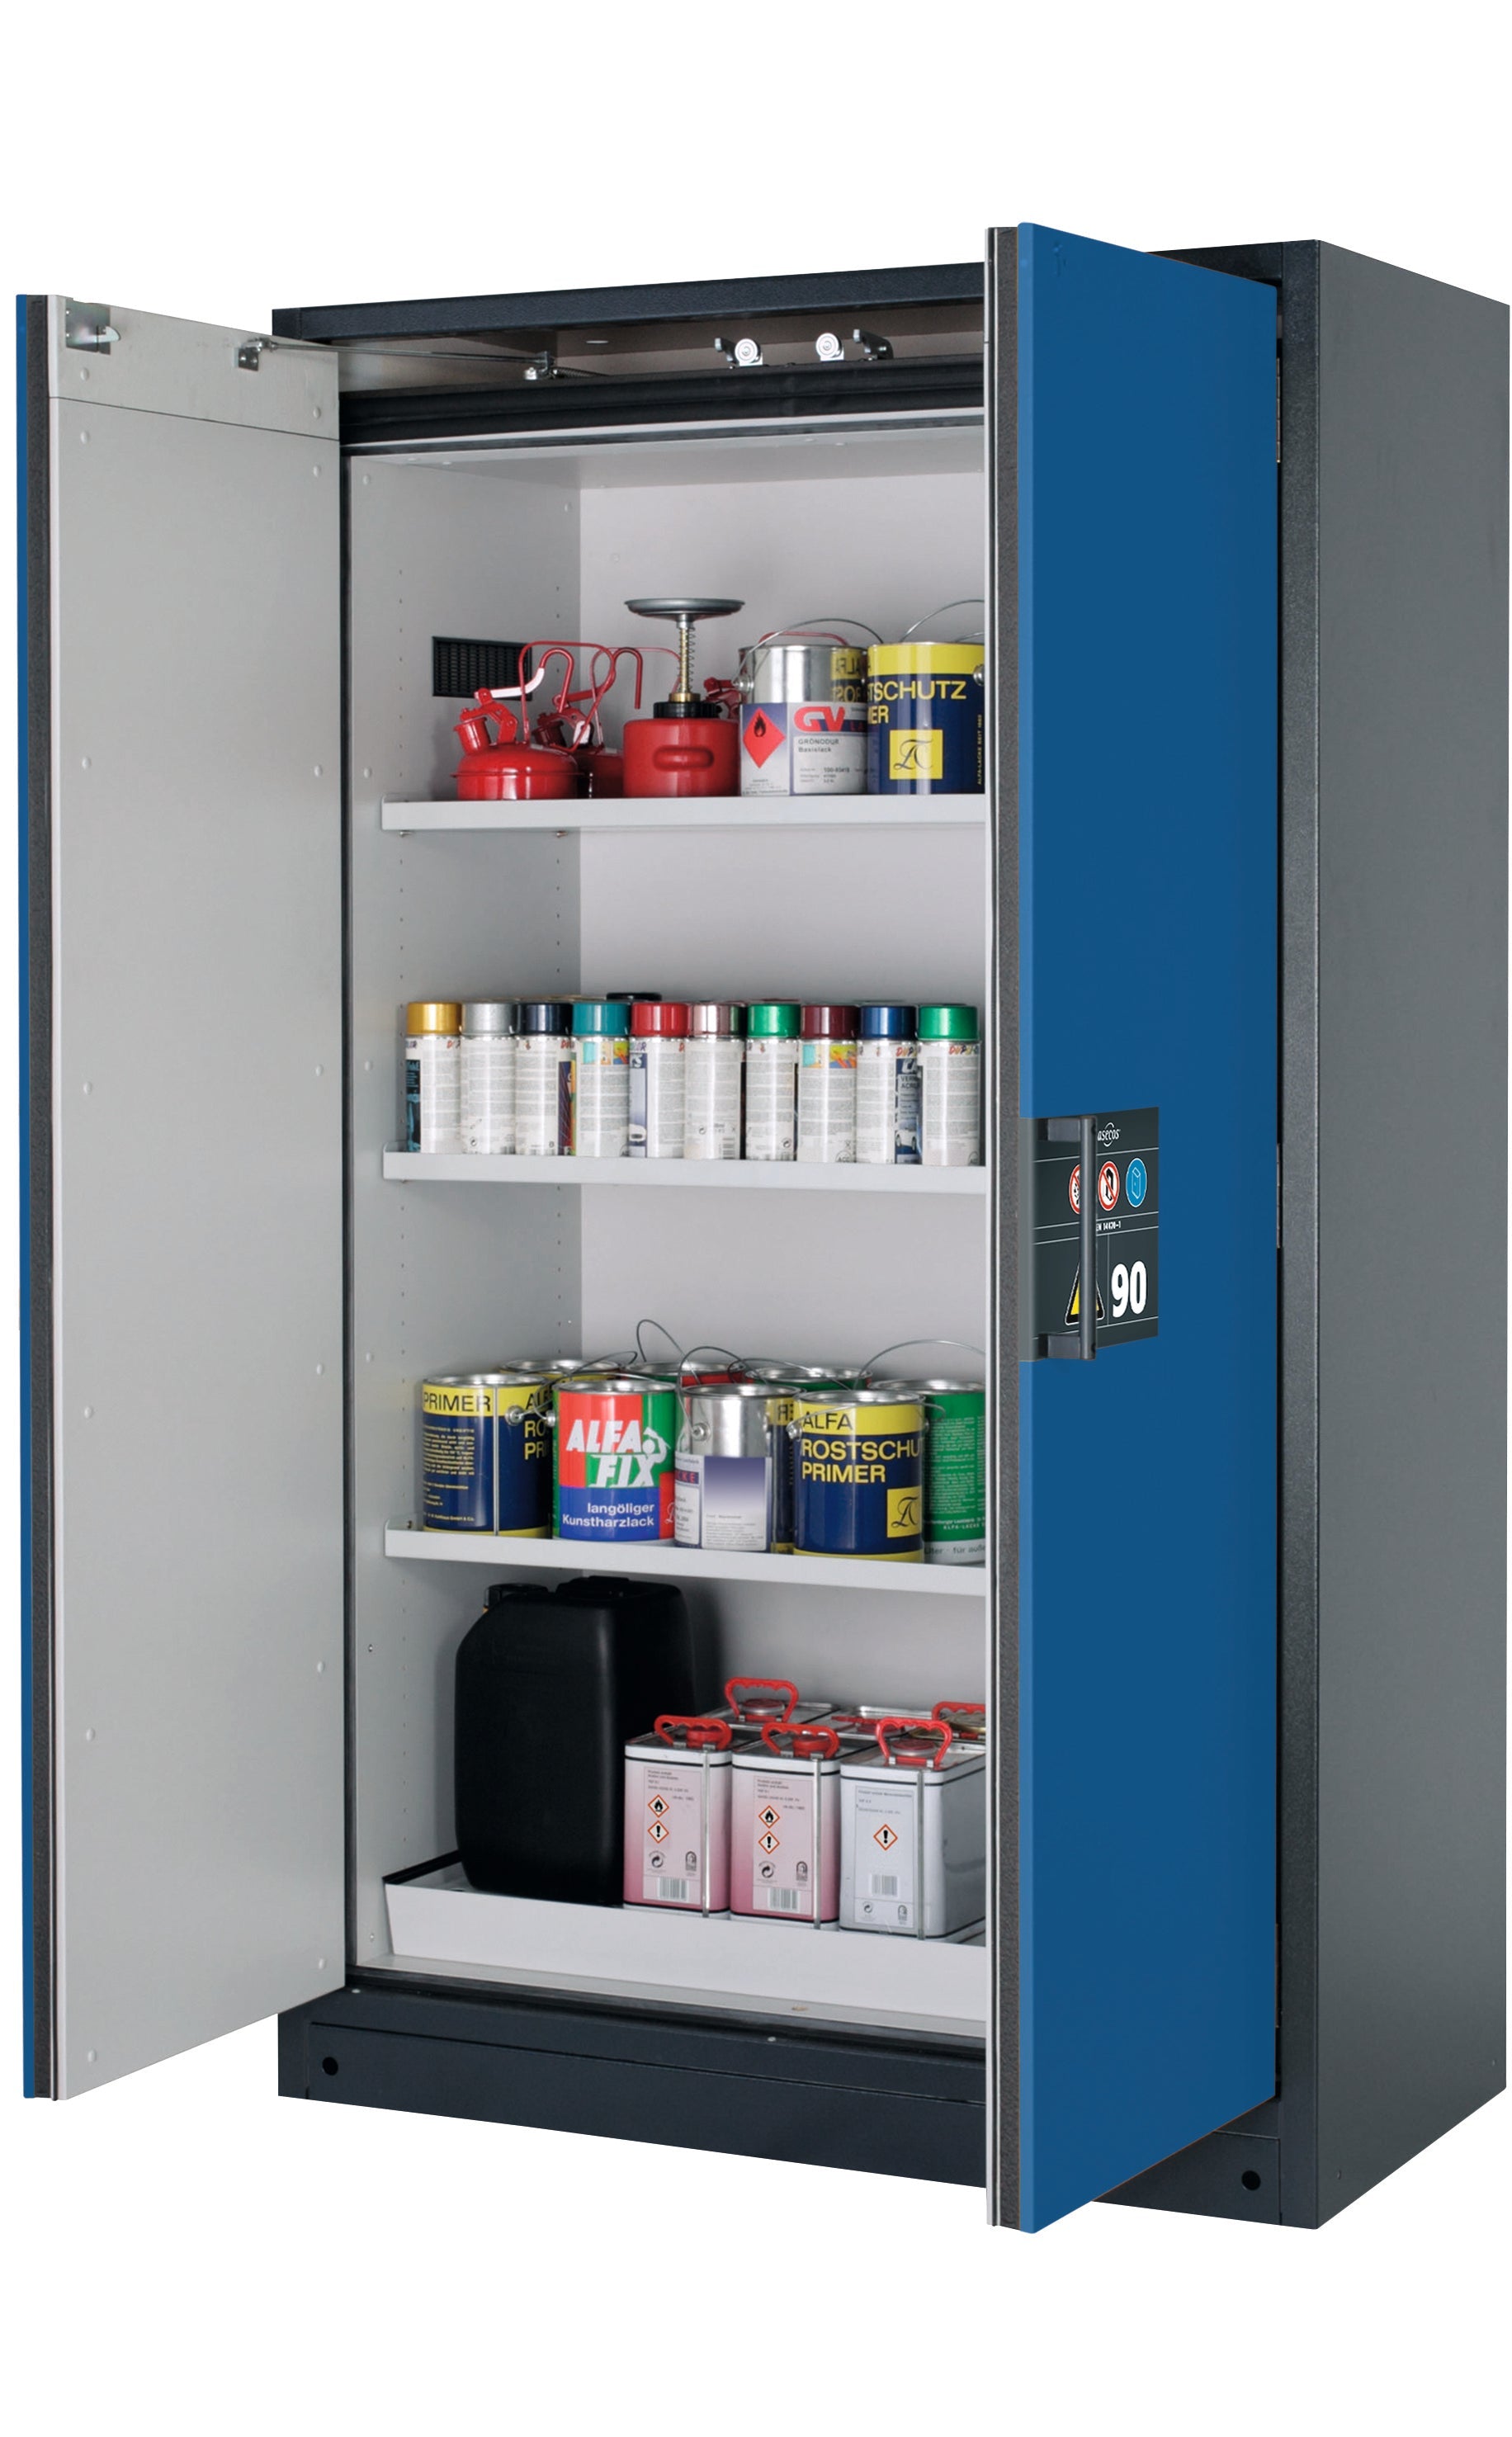 Type 90 safety storage cabinet Q-CLASSIC-90 model Q90.195.120 in gentian blue RAL 5010 with 3x shelf standard (sheet steel),